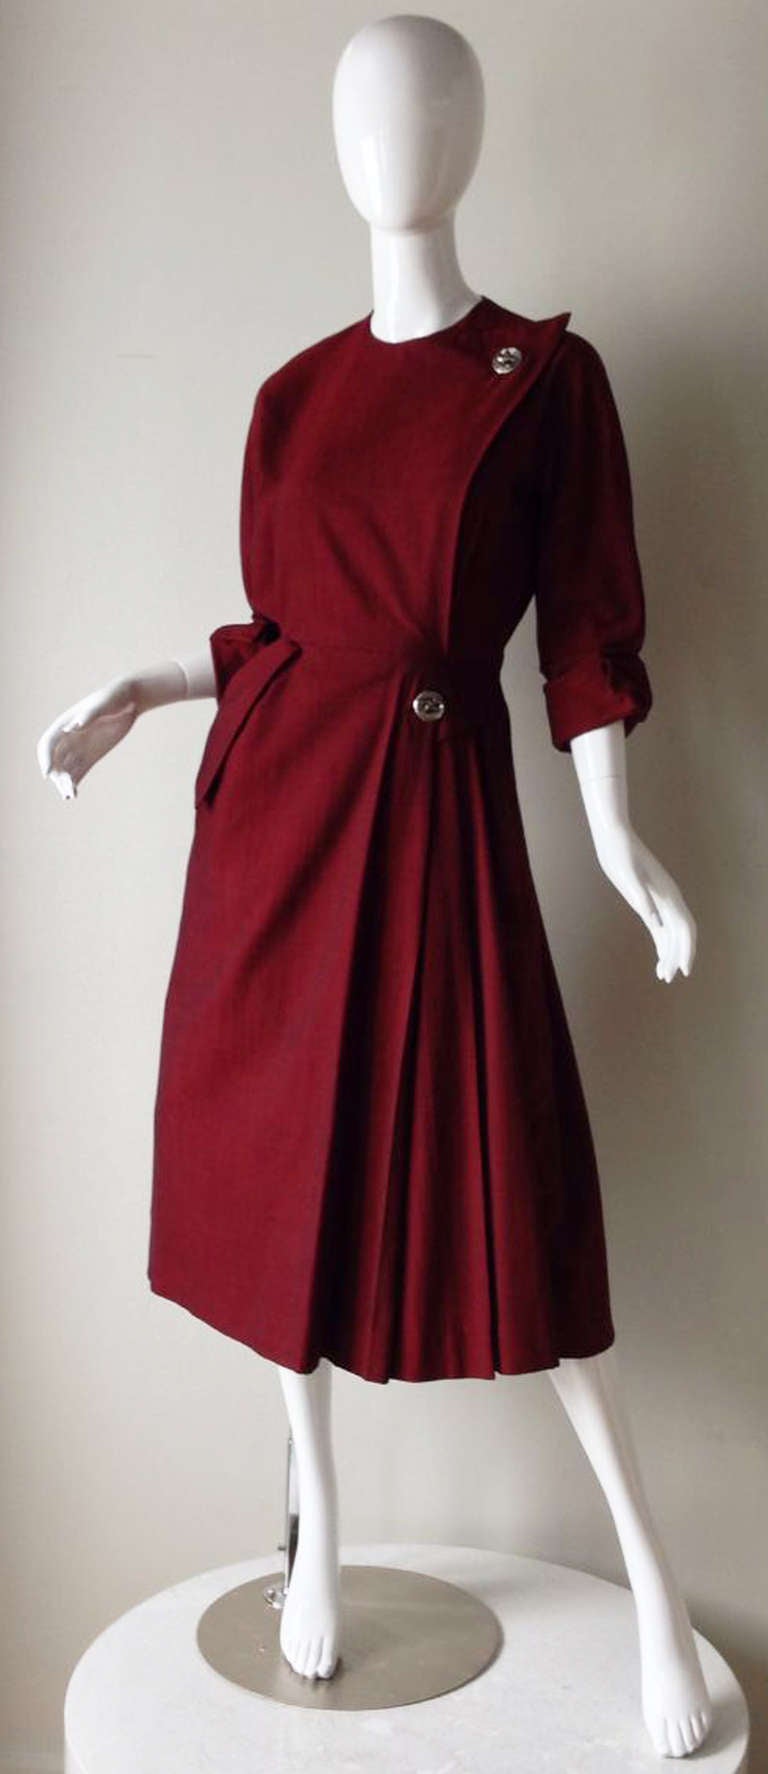 A fine and rare vintage Christian Dior afternoon/cocktail dress. Red/black woven wool fabric features precision seams, nipped waist, turned cuffs and faux 